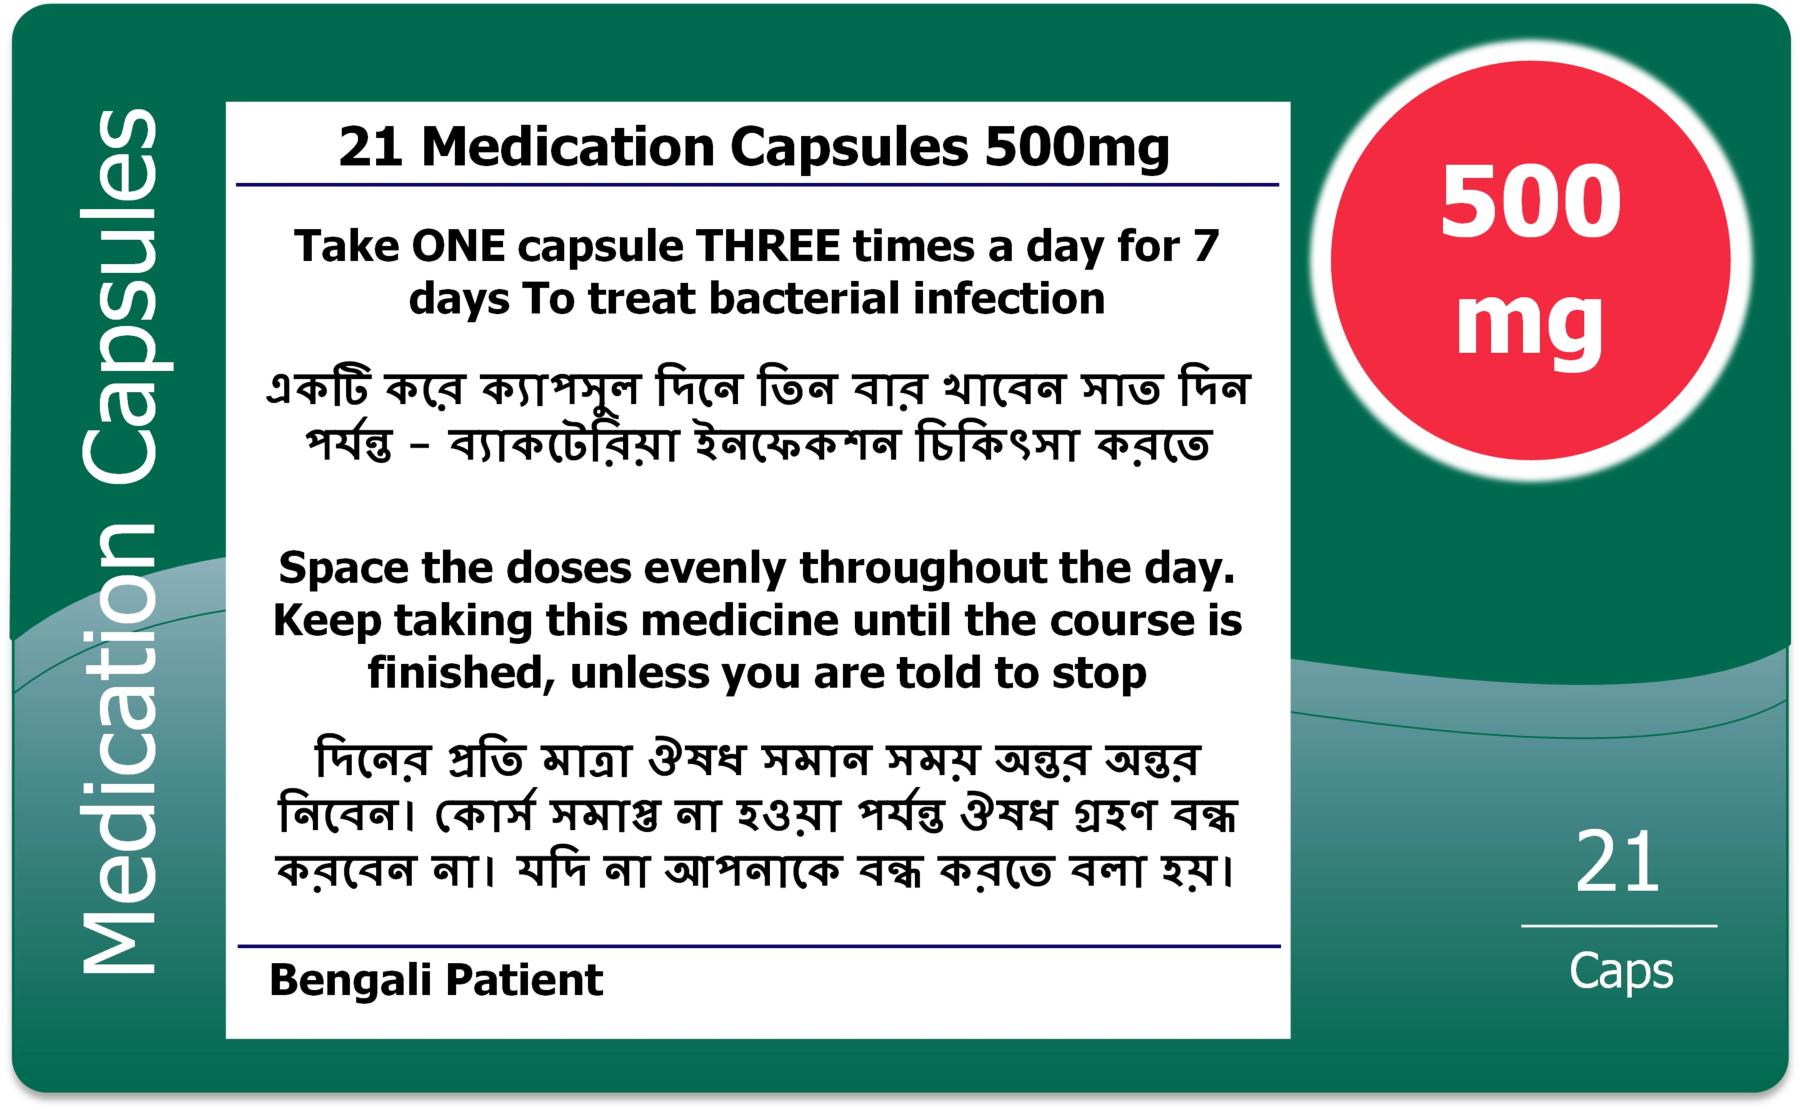 Example of medicines label translated into Bengali